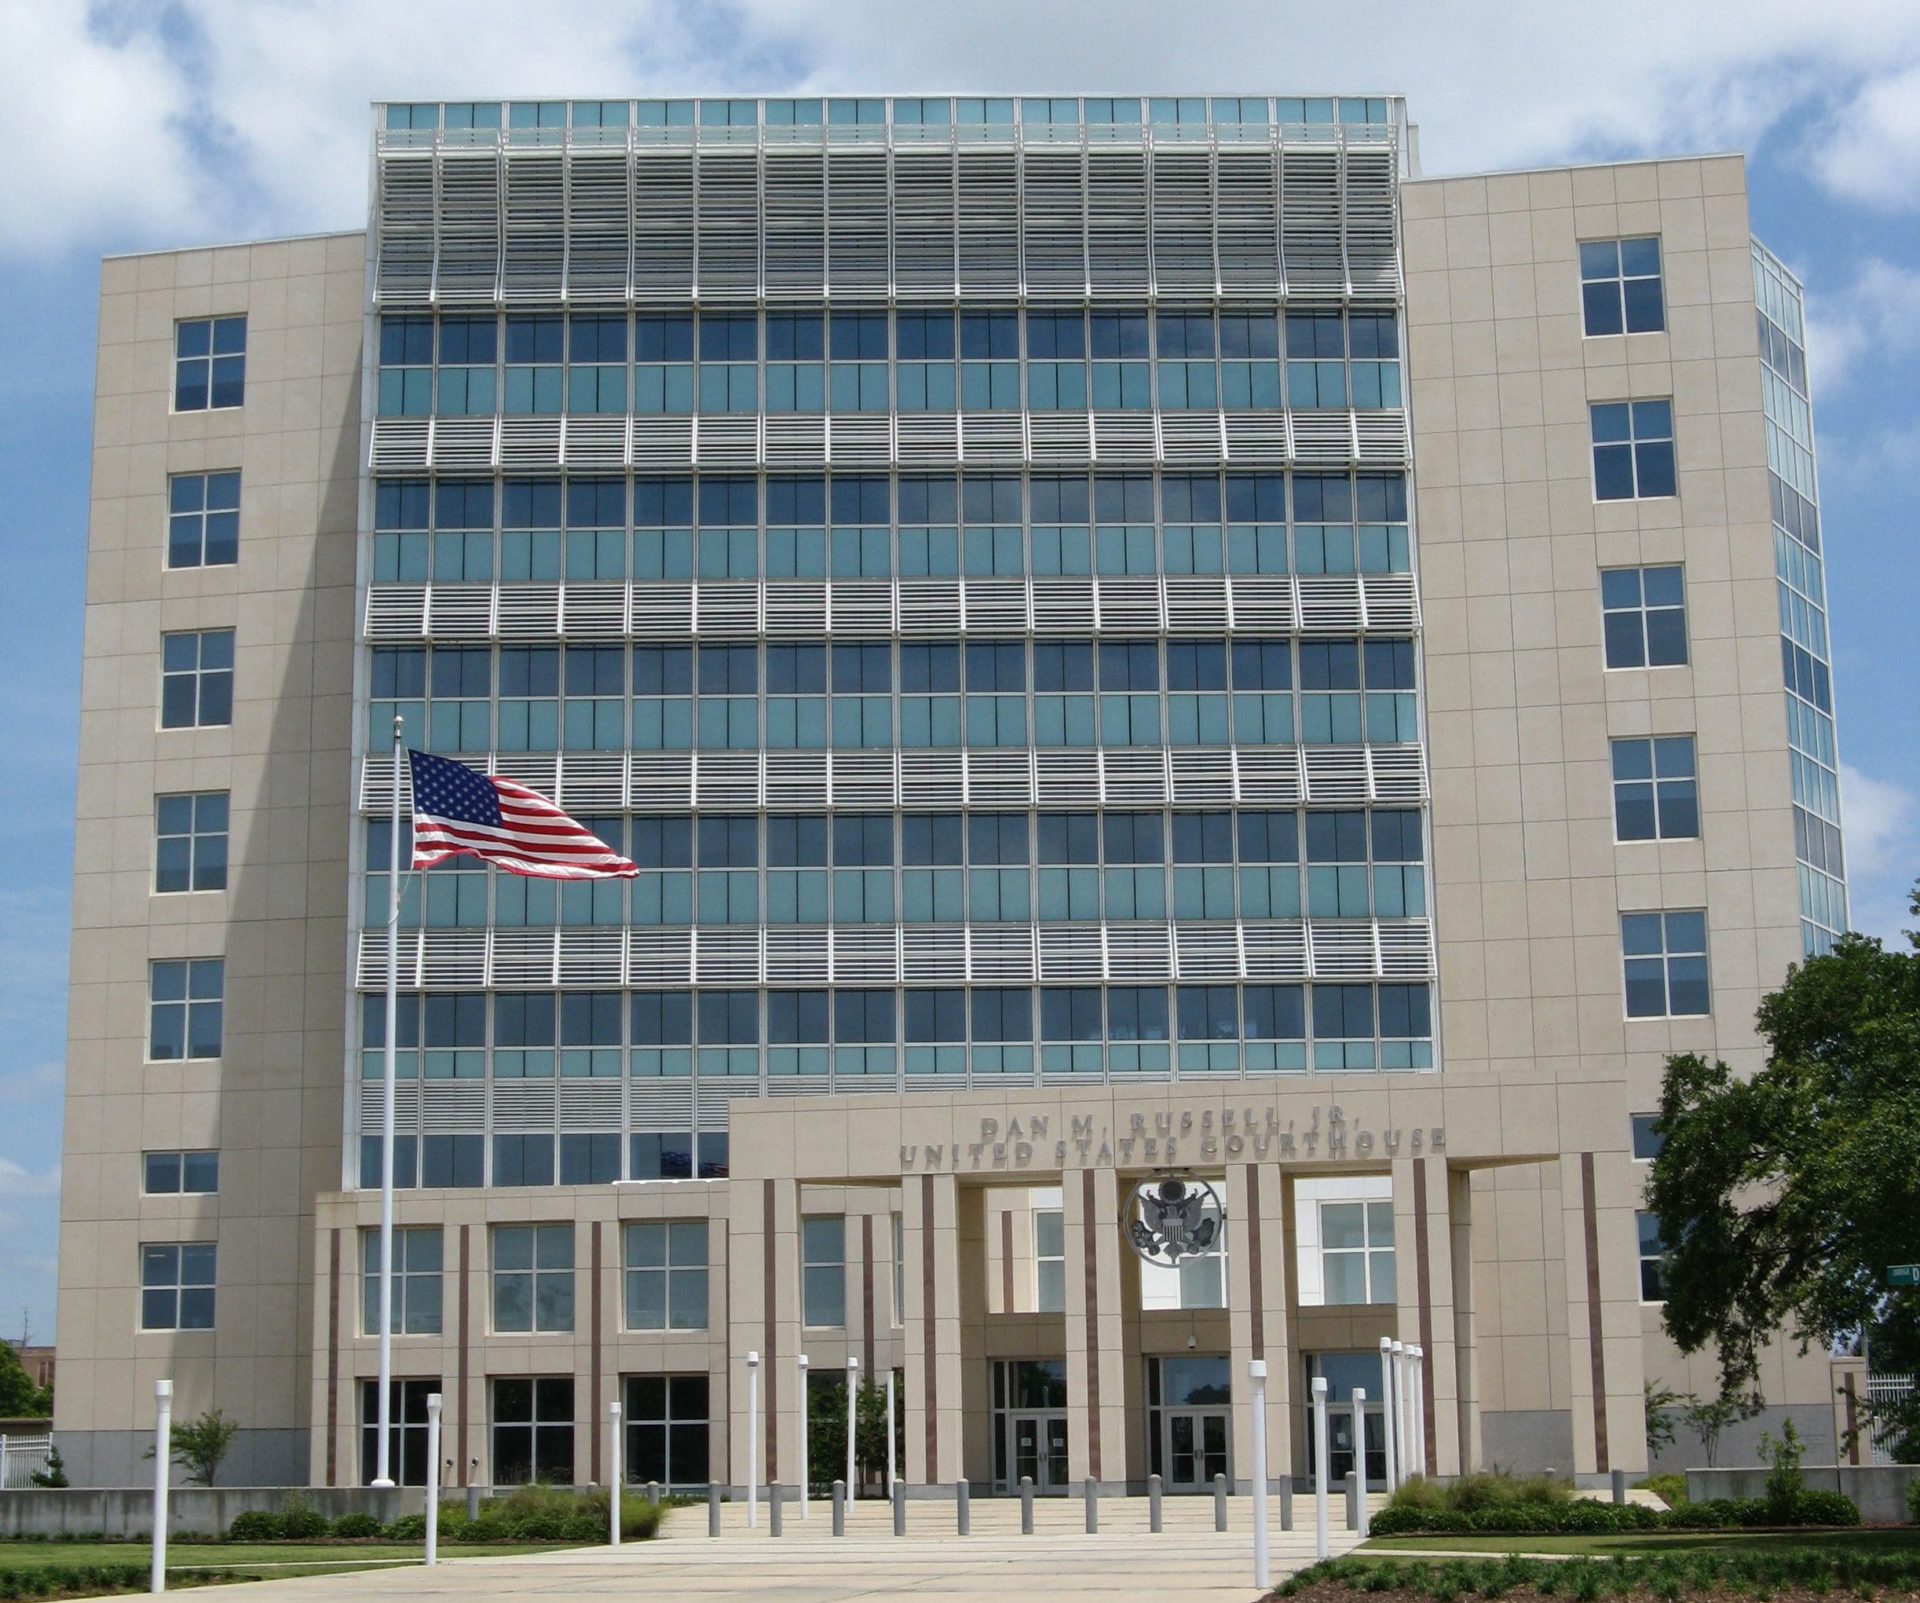 US Courthouse, Gulfport MS